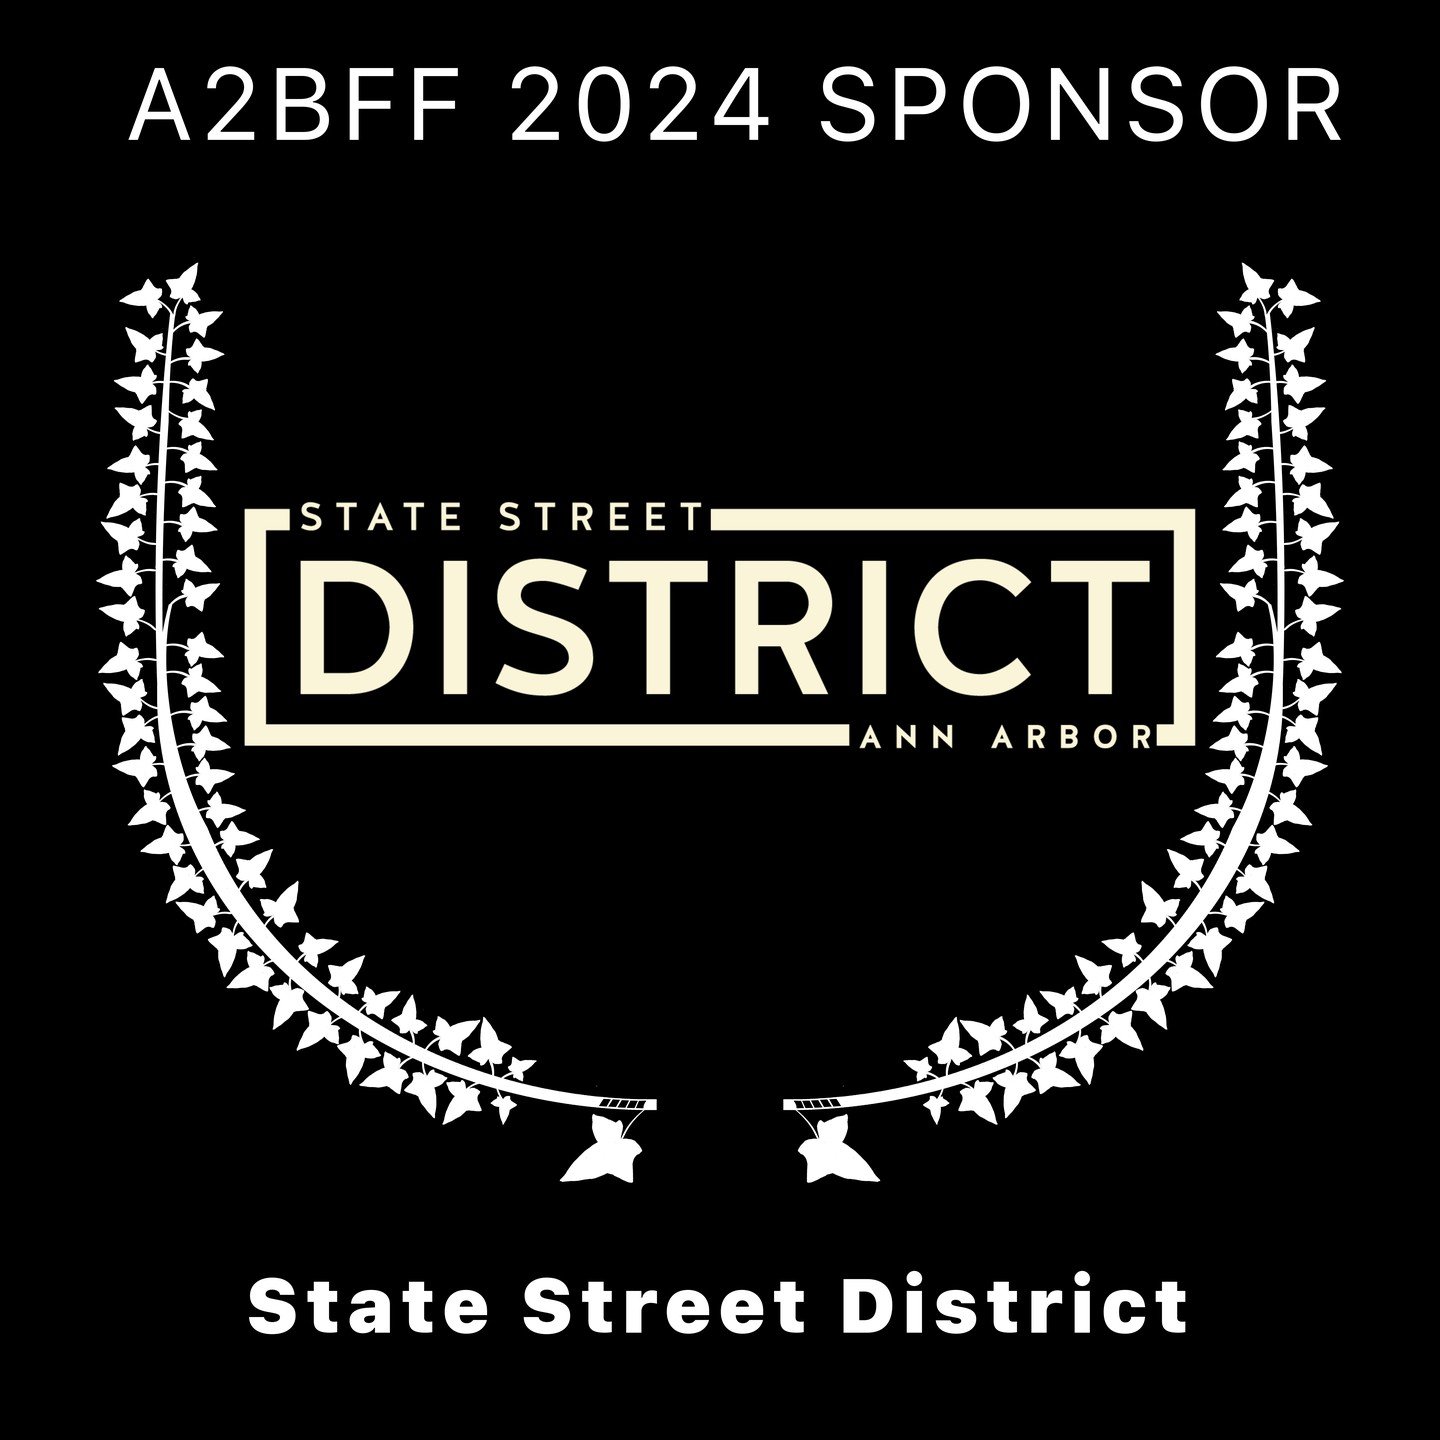 We are honored to announce that State Street District has joined our festival as a sponsor.

Check out their event schedule: https://statestreetdistrict.org/events

Please support our sponsors!

#a2bff 
#annarbor